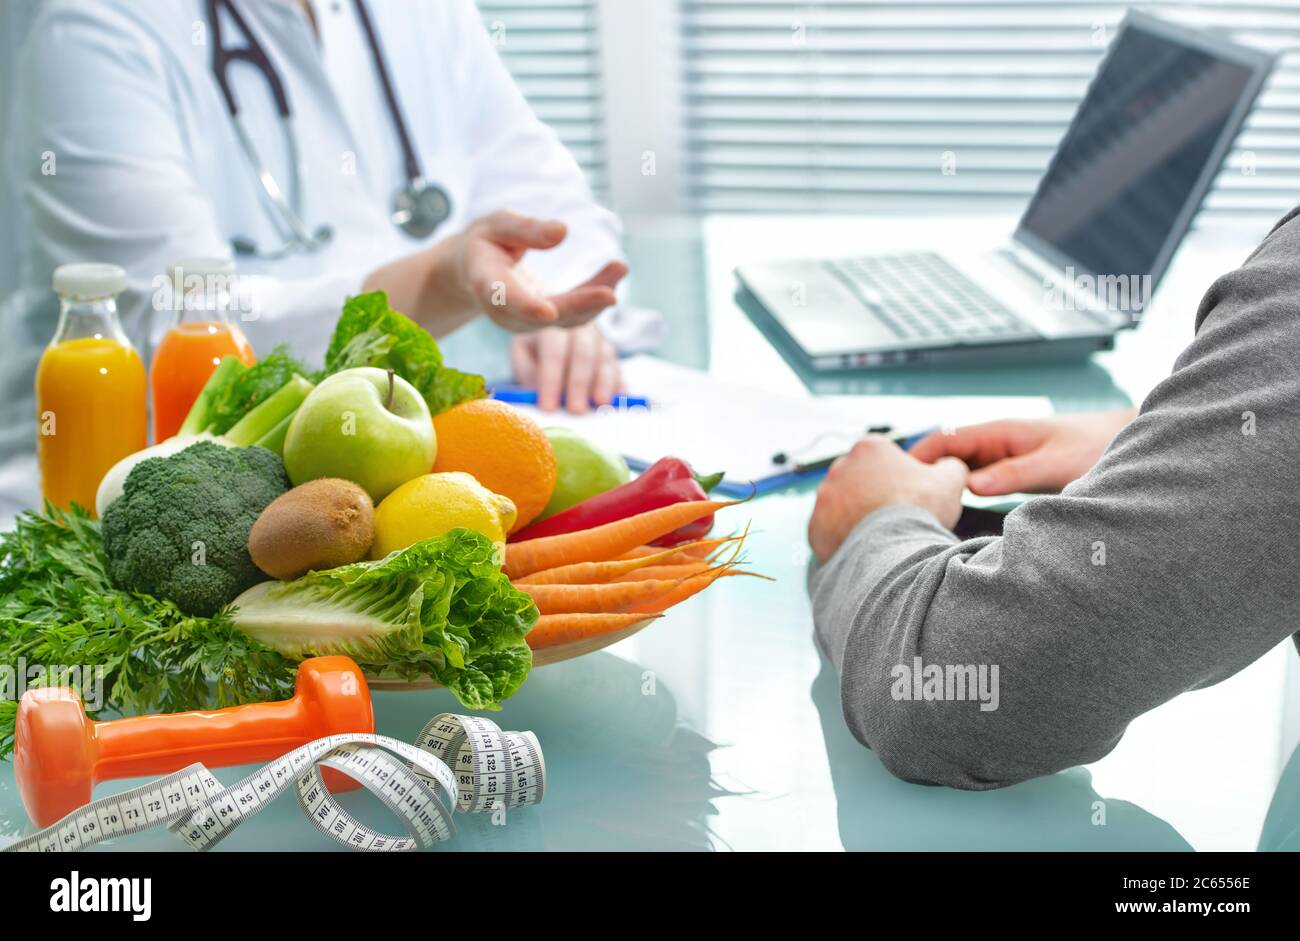 Nutritionist is consulting the patient about healthy diet with vegetables and fruits. Nutrition und dieting concept Stock Photo